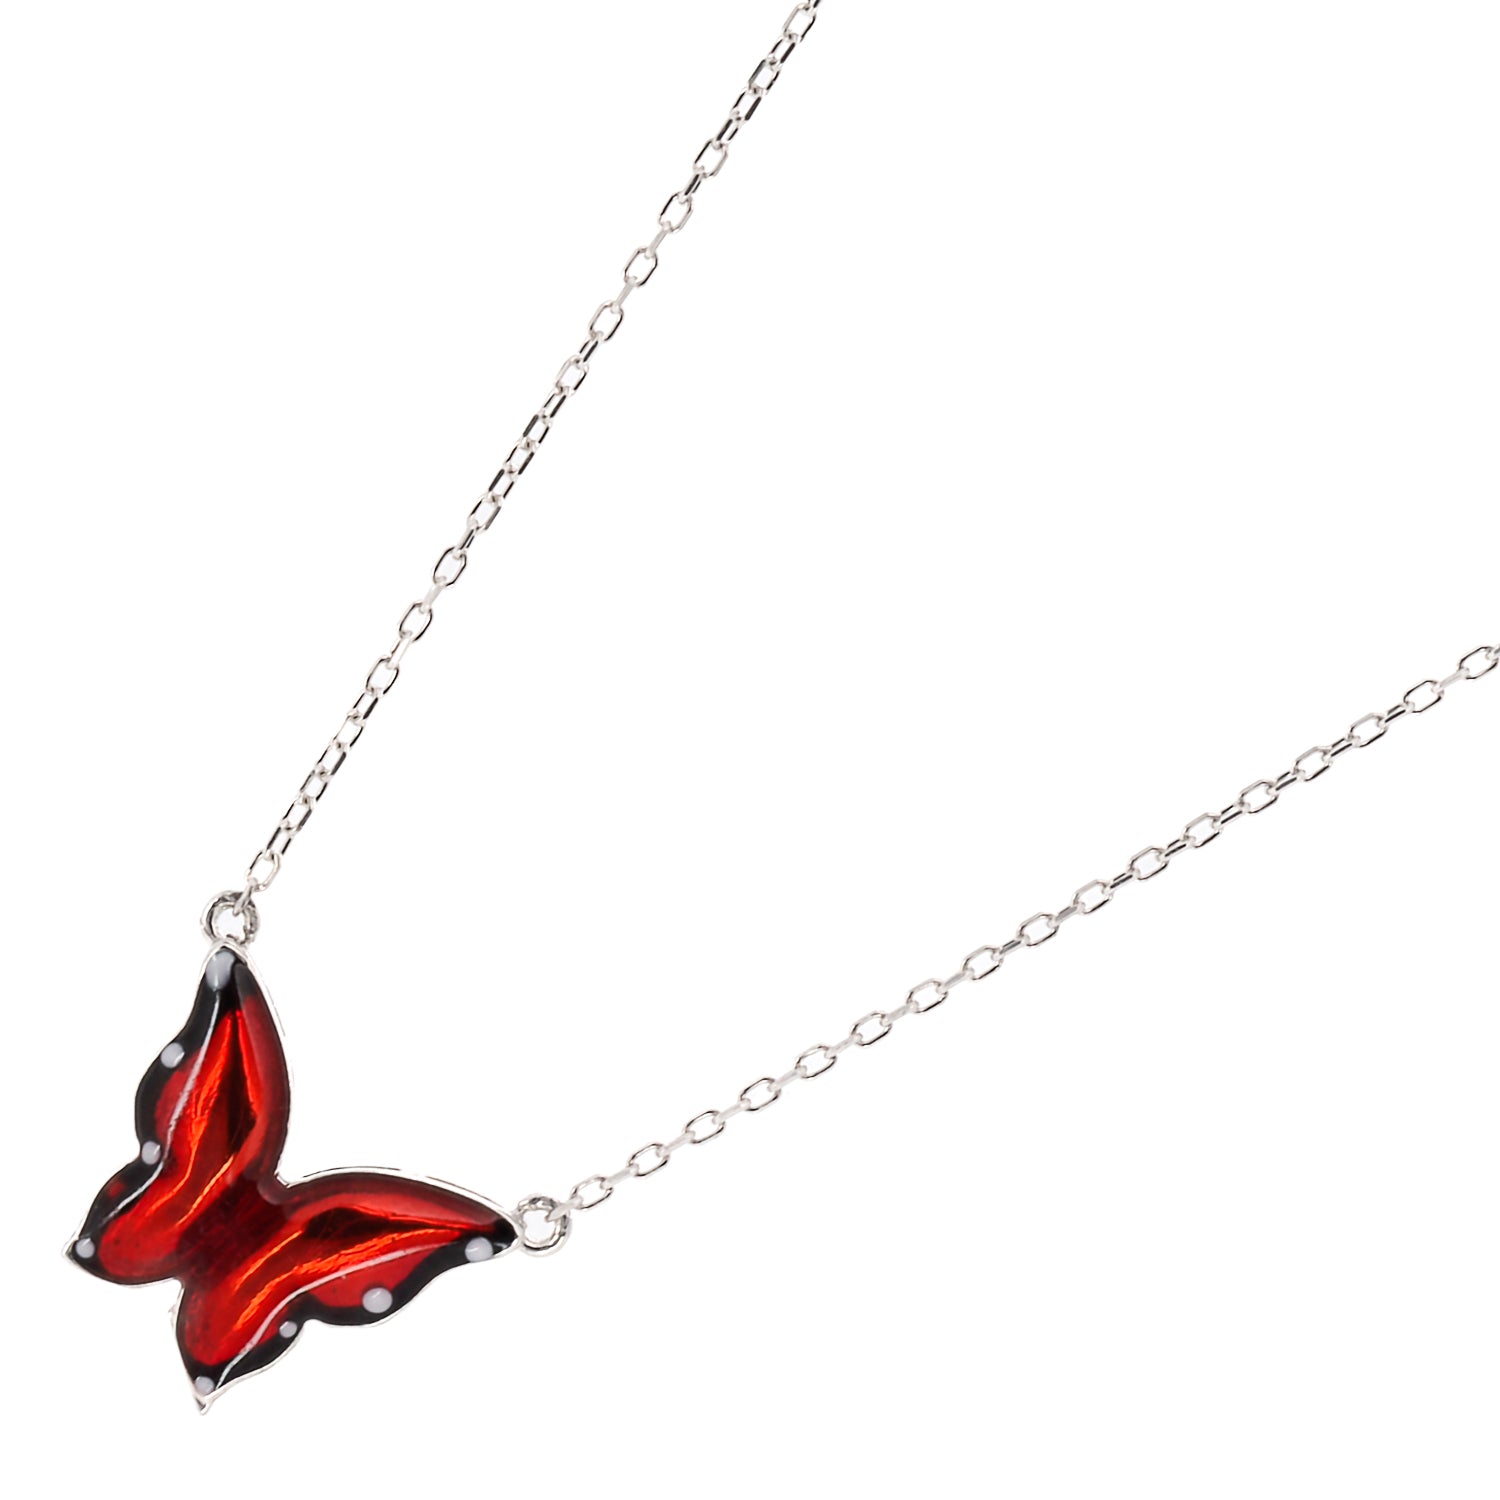 Silver Joy Red Enamel Butterfly Necklace, a handmade piece of jewelry that inspires spiritual growth and self-transformation.